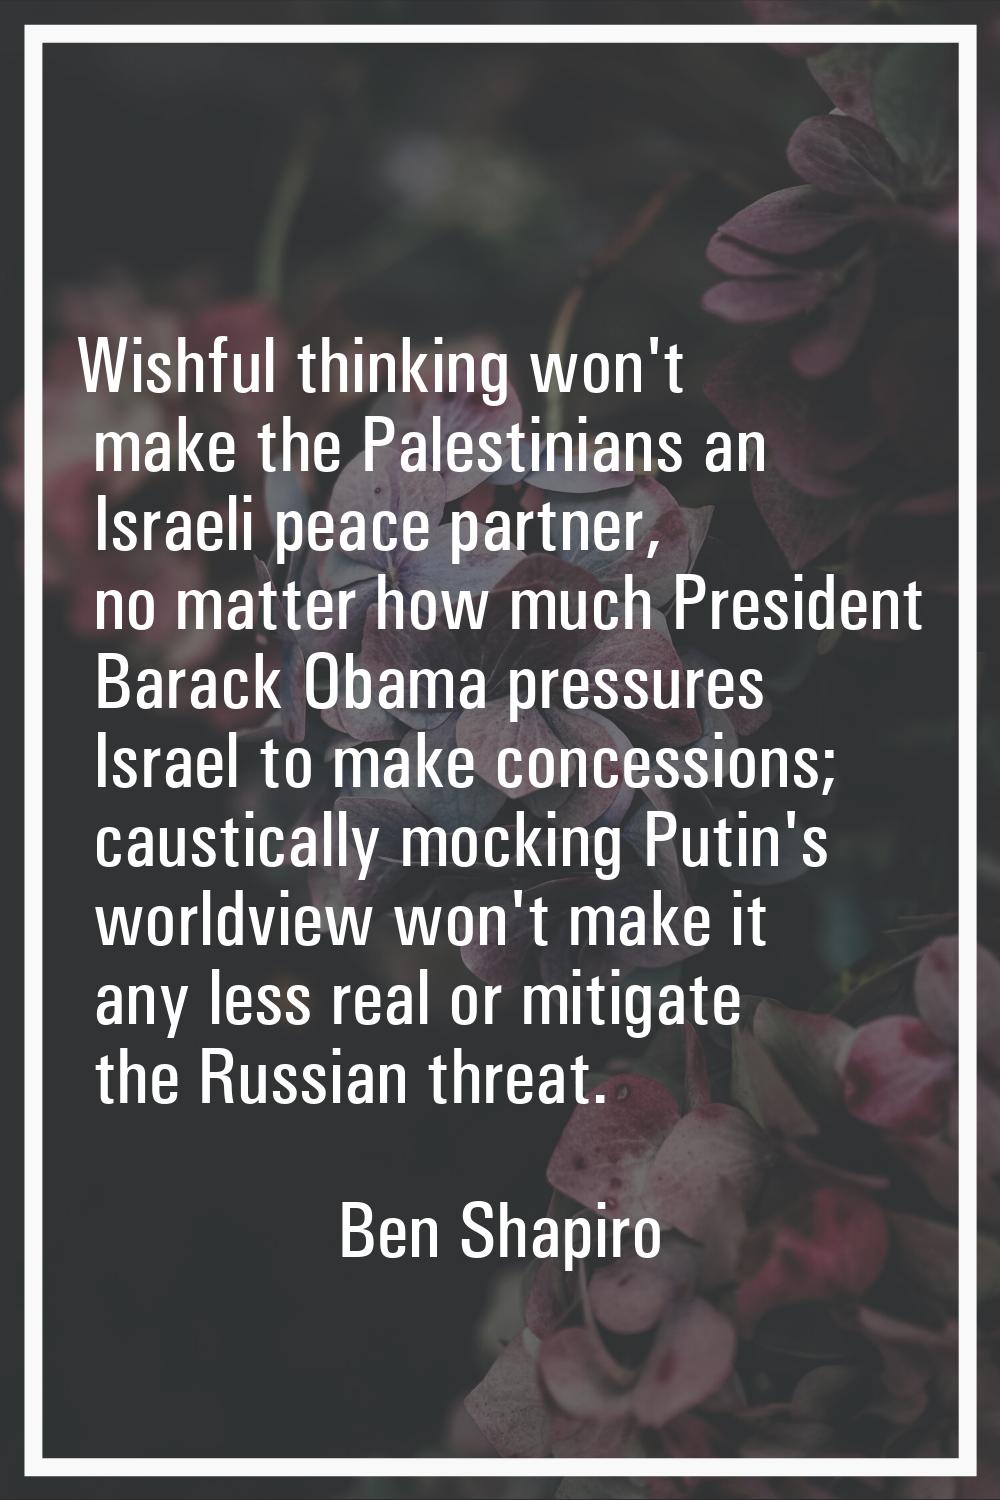 Wishful thinking won't make the Palestinians an Israeli peace partner, no matter how much President